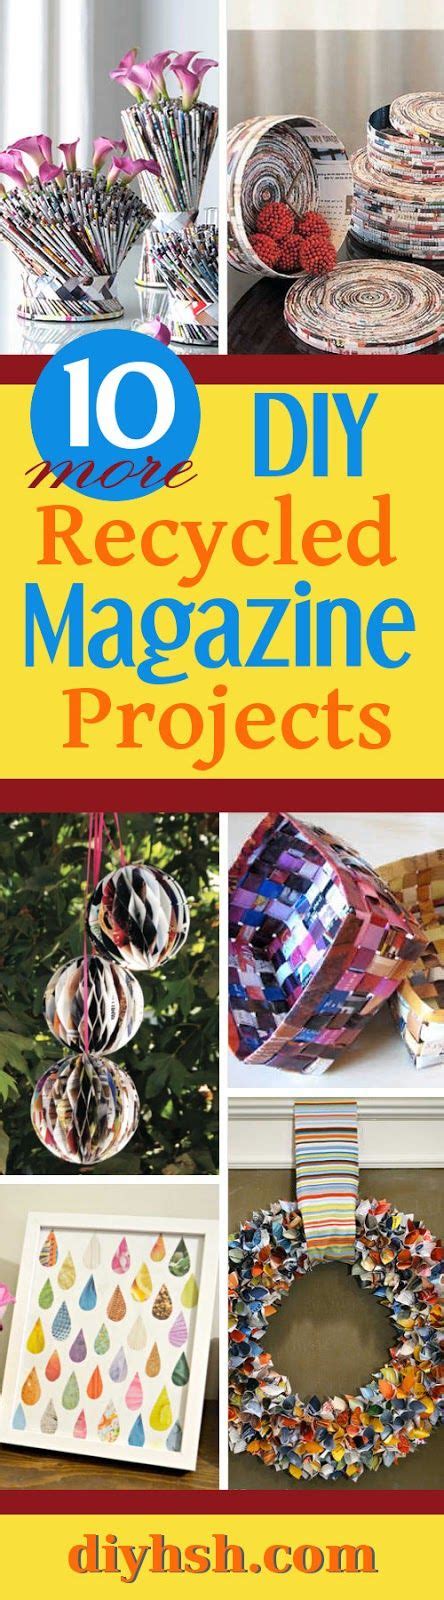 10 More Diy Recycled Magazine Projects Diy Home Sweet Home Paper